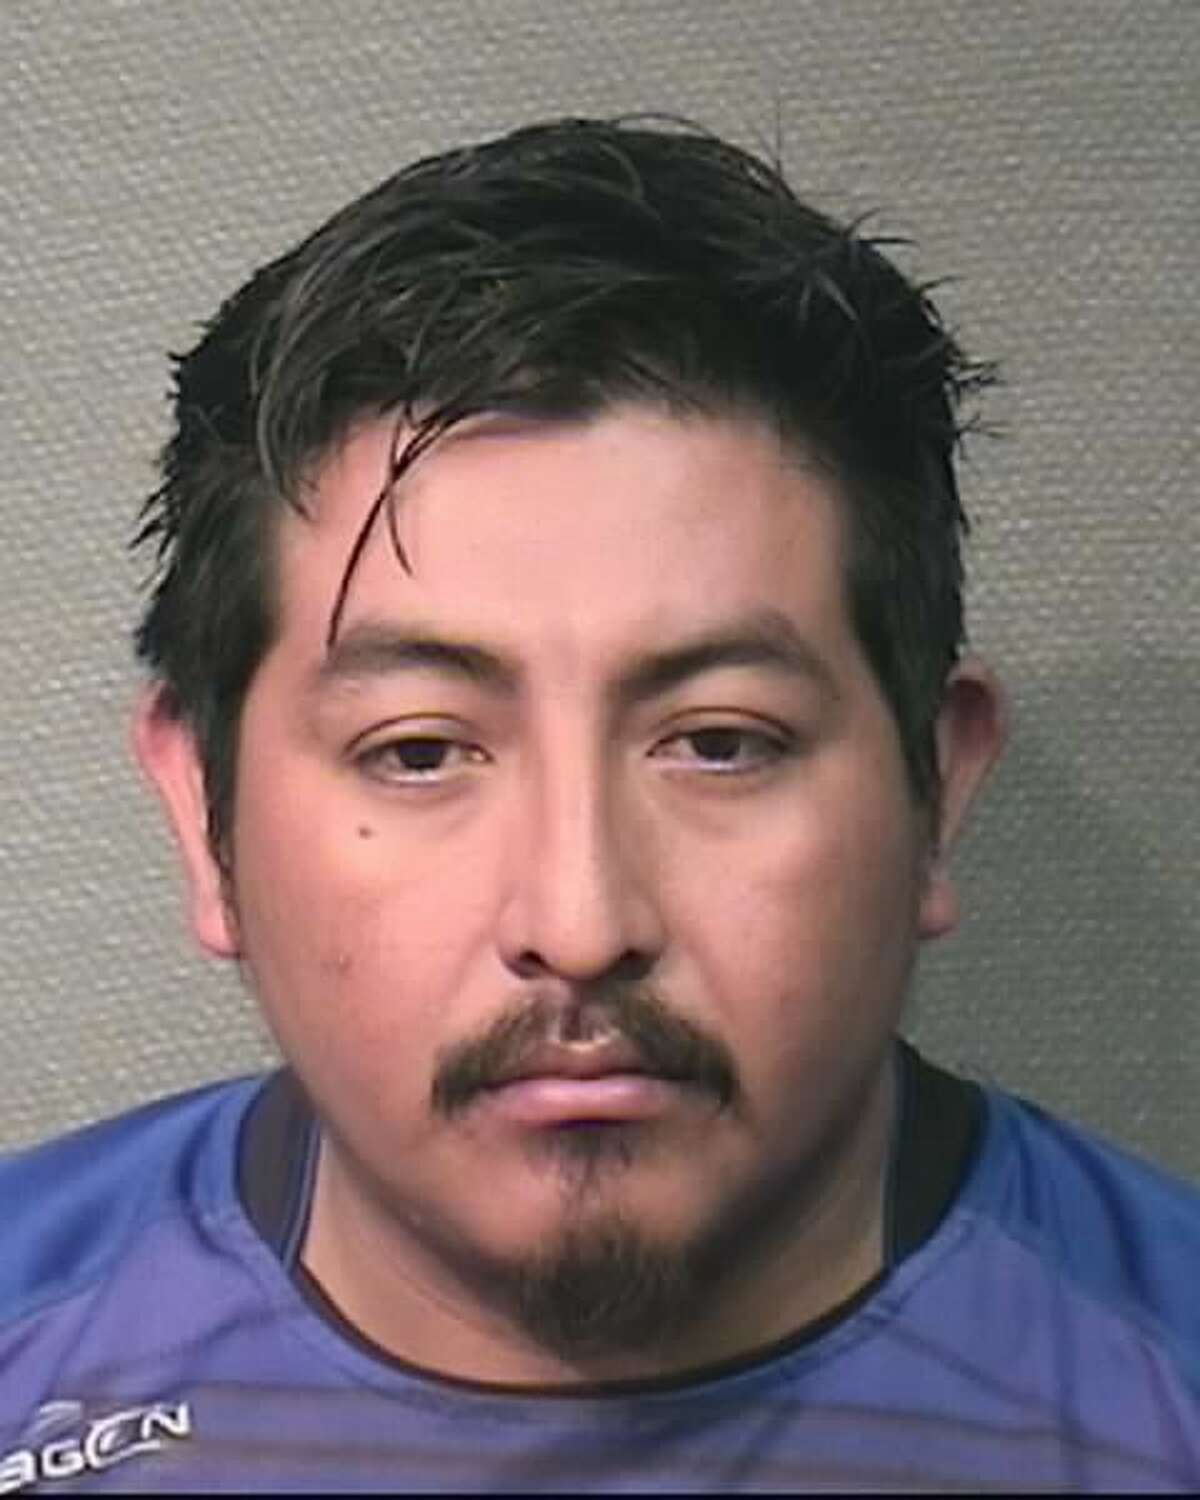 PHOTOS: Alleged abduction attemptOscar Santay, 30, is charged with making terroristic threats and attempting to kidnap a 13-year-old girl outside the Walter Neighborhood Library in southwest Houston. >>>See crimes that have shocked Texas in 2018 ...